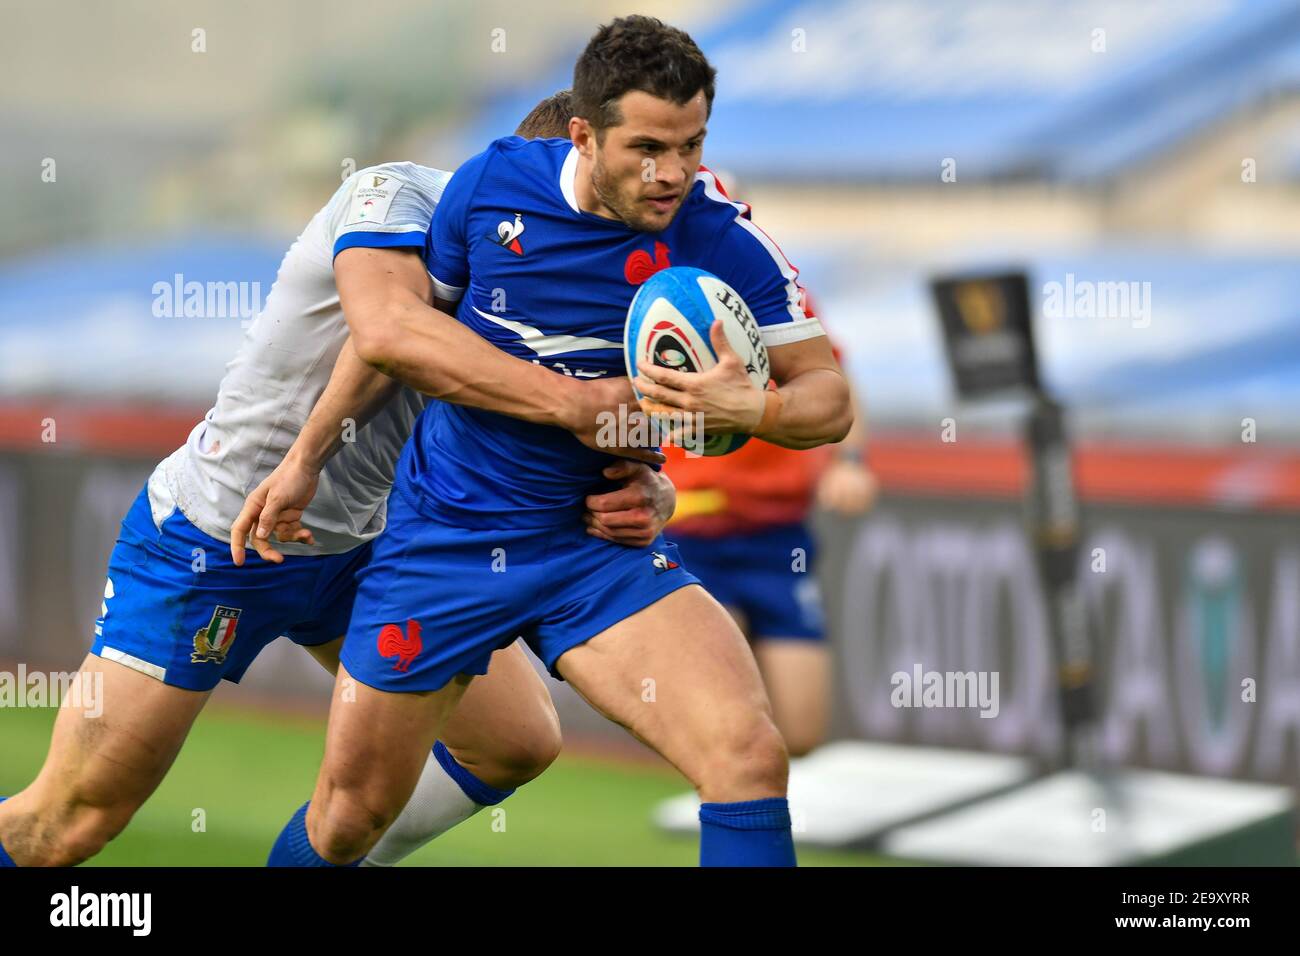 Rome, Italy. 6th Feb, 2021. Rome, Italy, Stadio Olimpico, February 06, 2021, Brice Dulin (France) carries the ball during Italy vs France - Rugby Six Nations match Credit: Carlo Cappuccitti/LPS/ZUMA Wire/Alamy Live News Stock Photo